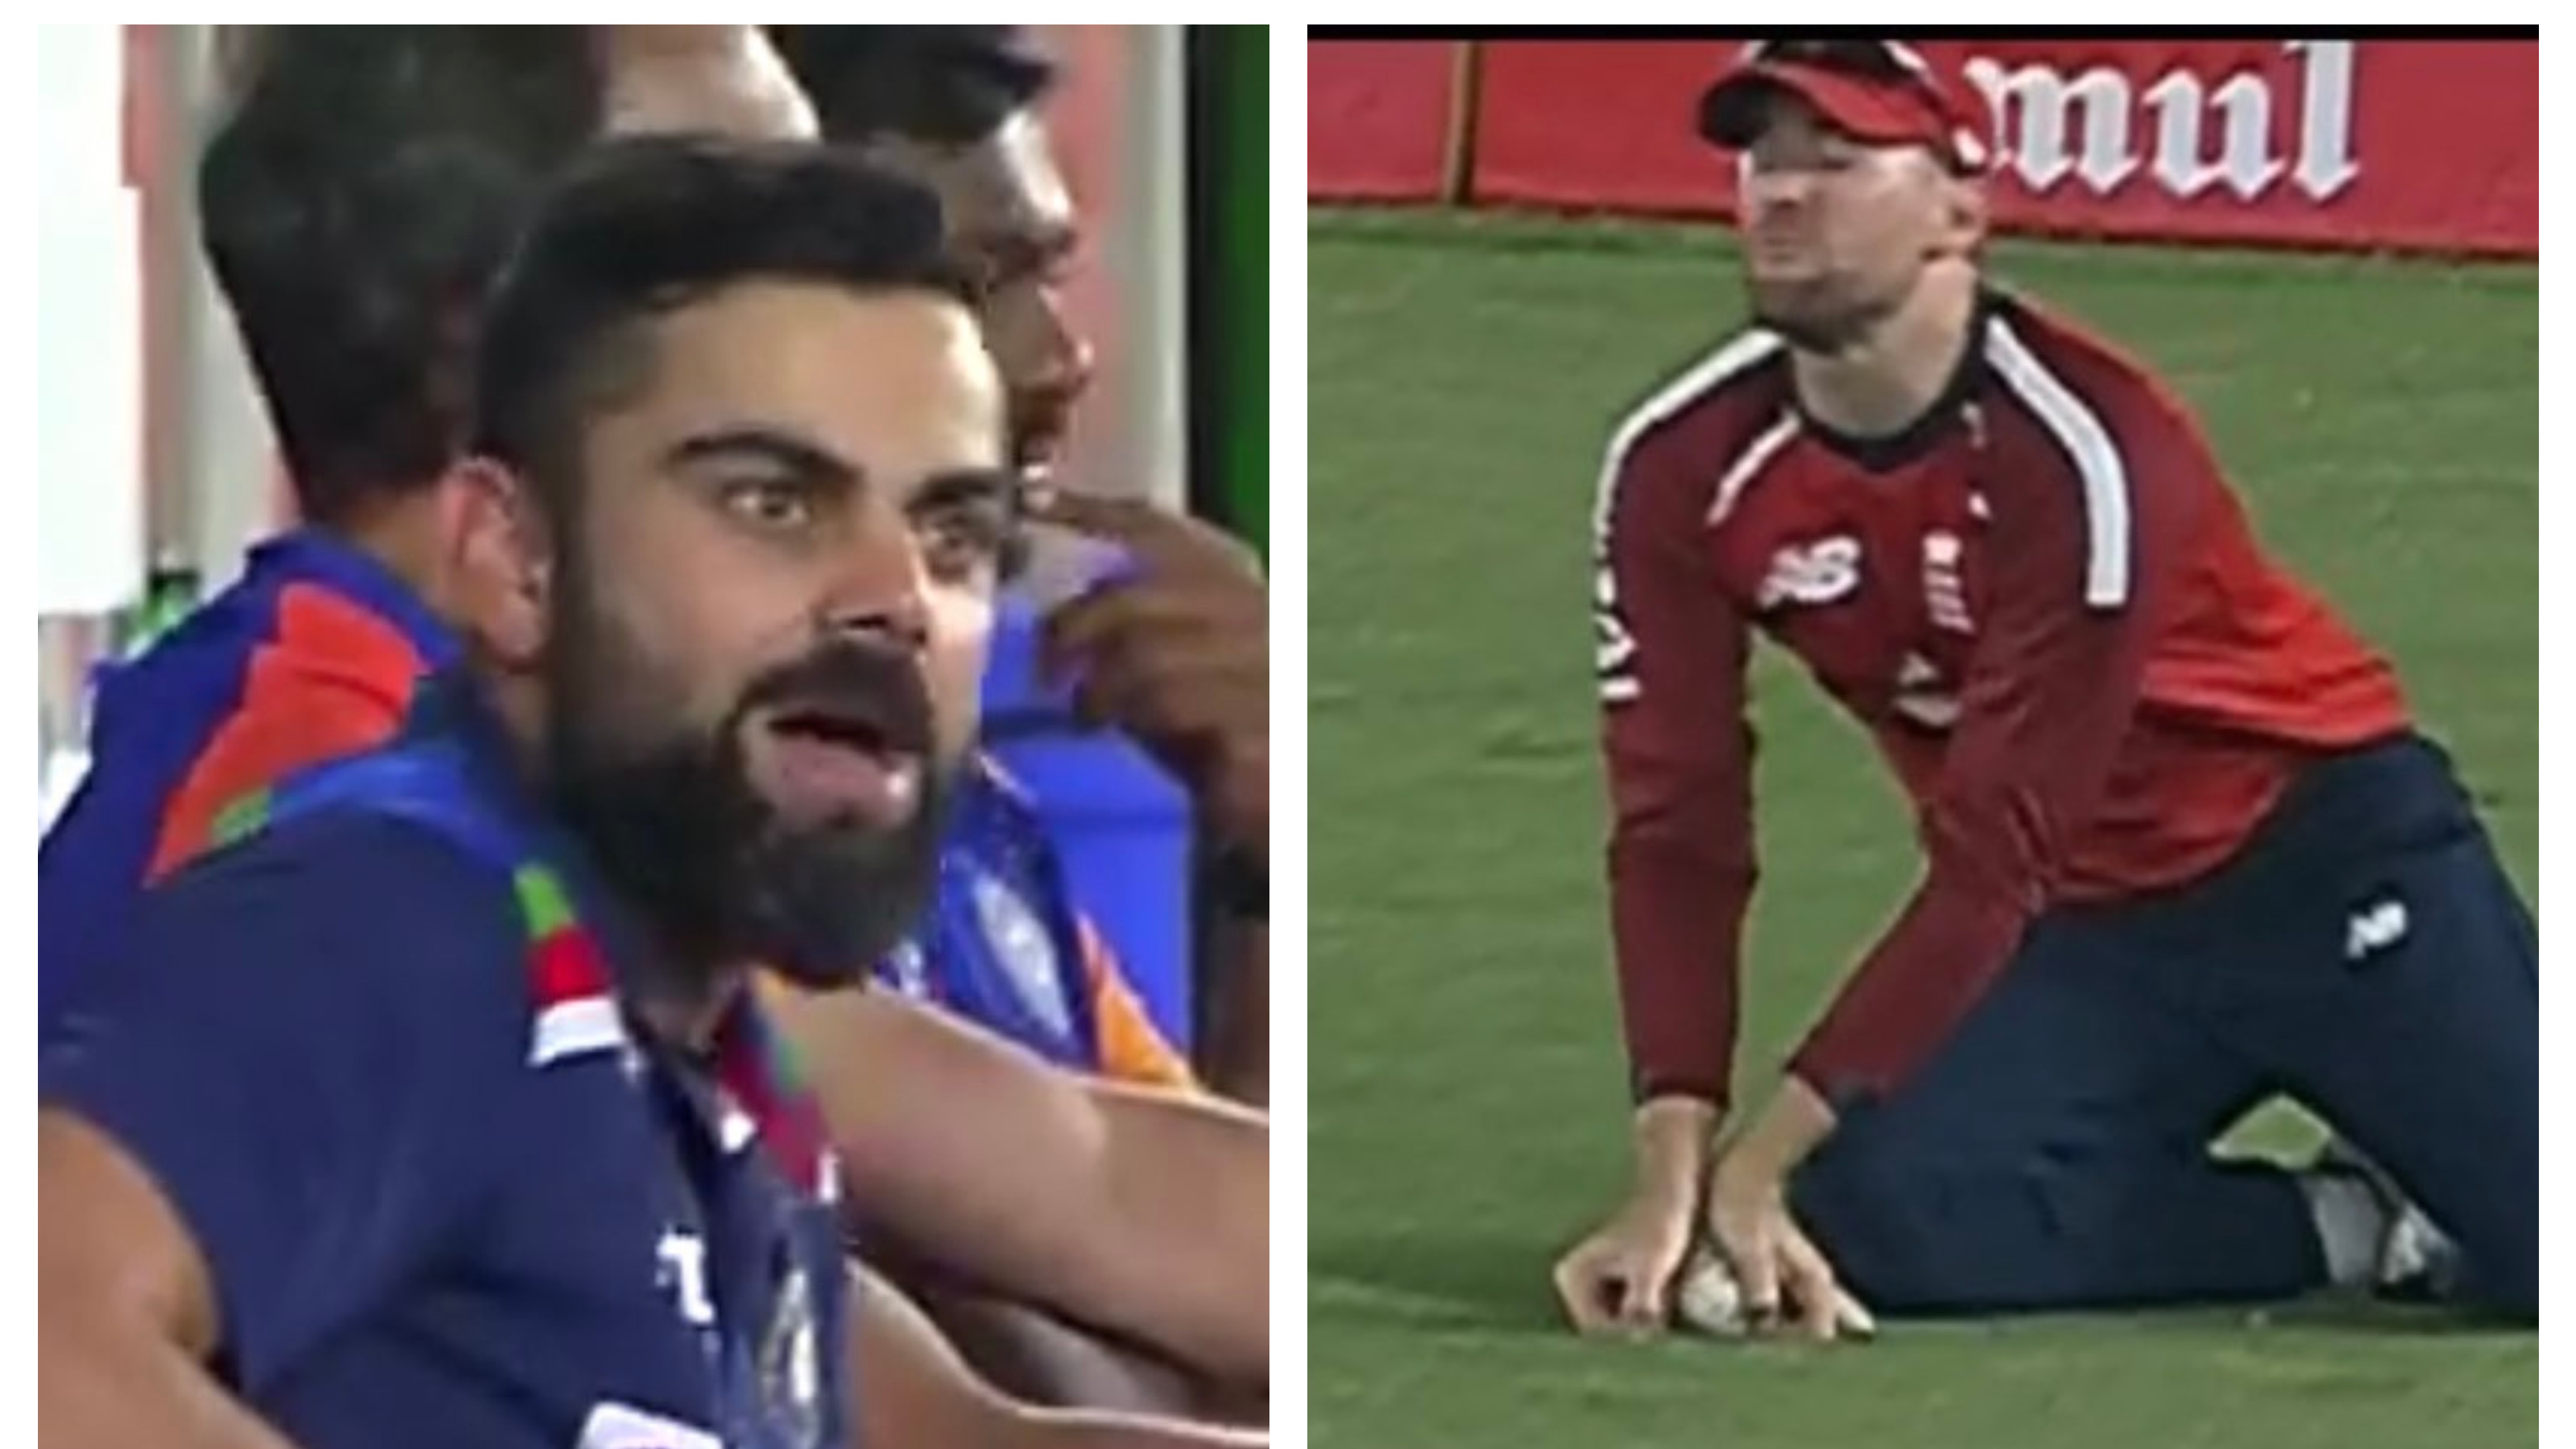 IND v ENG 2021: Cricket fraternity reacts to Dawid Malan’s controversial catch to get rid of Suryakumar Yadav